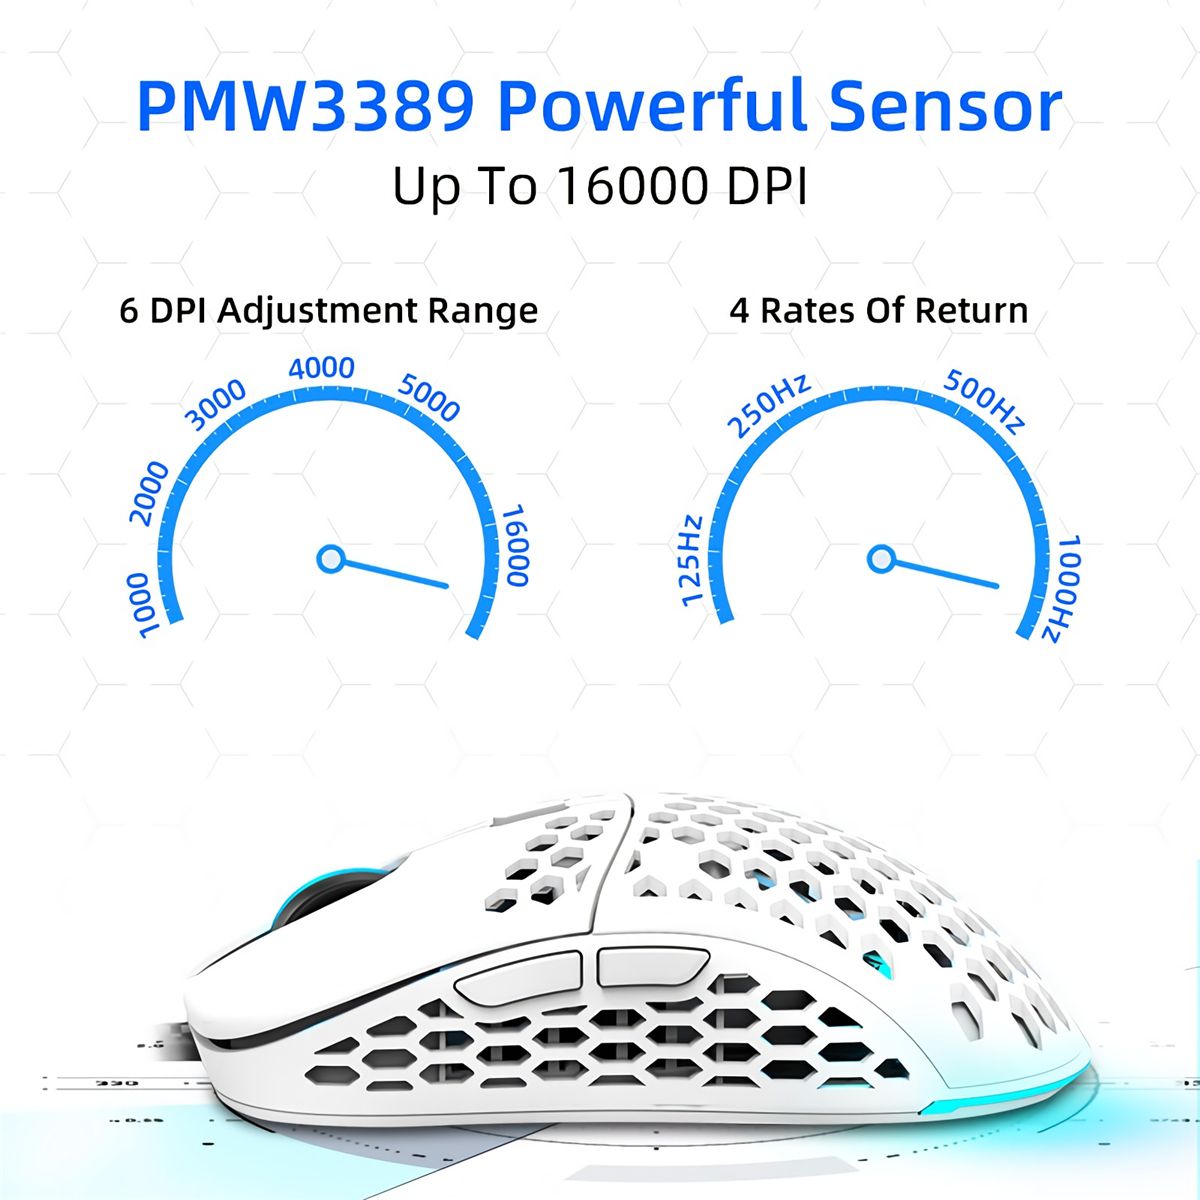 Machenike-M620-Wired-Gaming-Mouse-16000DPI-PMW3389-RGB-Computer-Mouse-Programmable-Hollow-Honeycomb--1738182